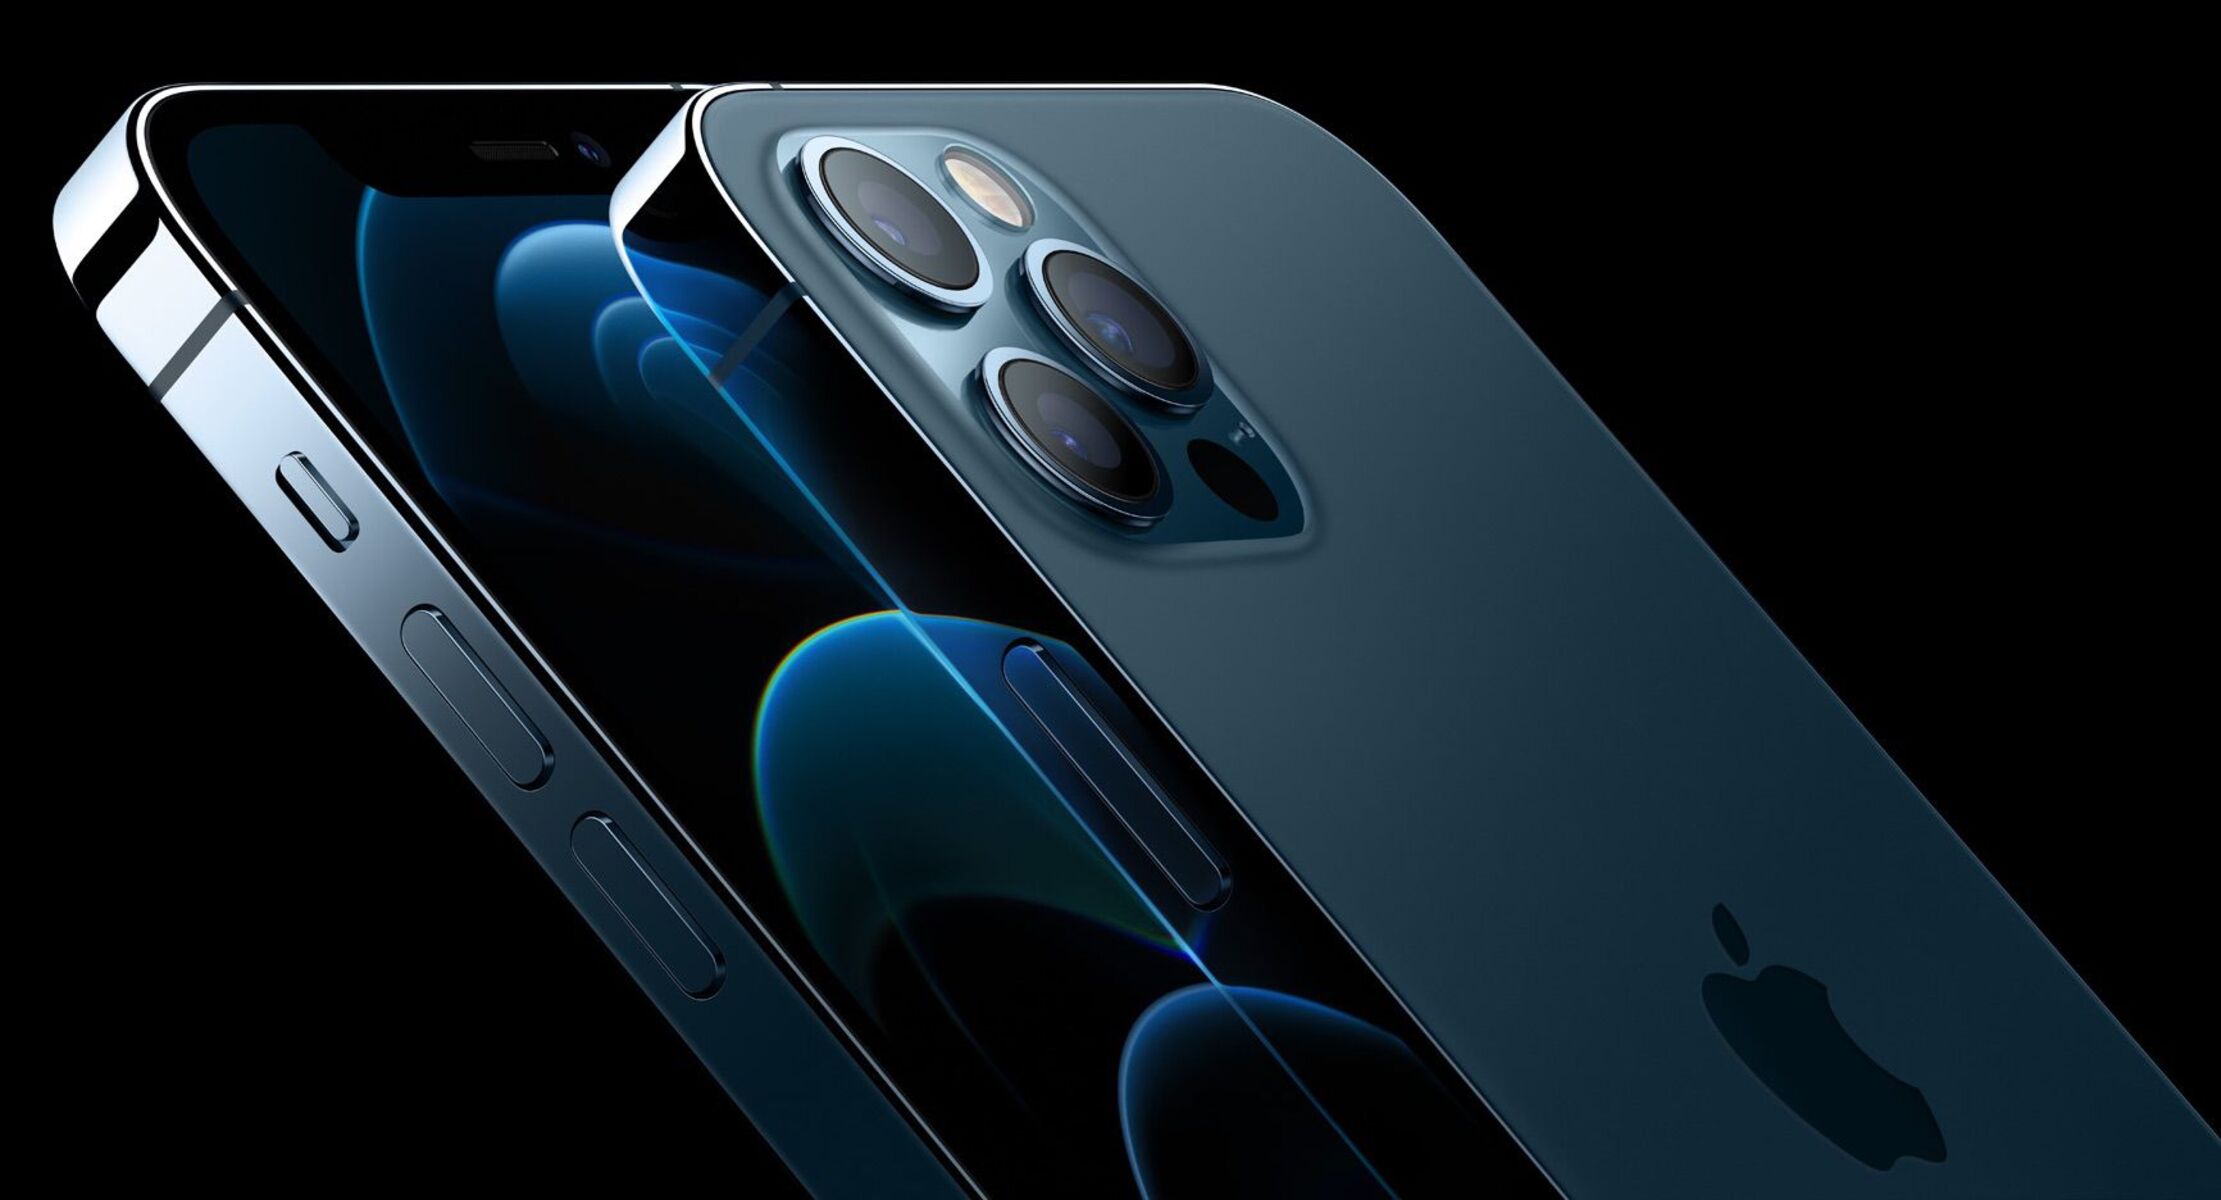 unveiling-the-release-date-of-iphone-12-pro-when-it-hit-the-market